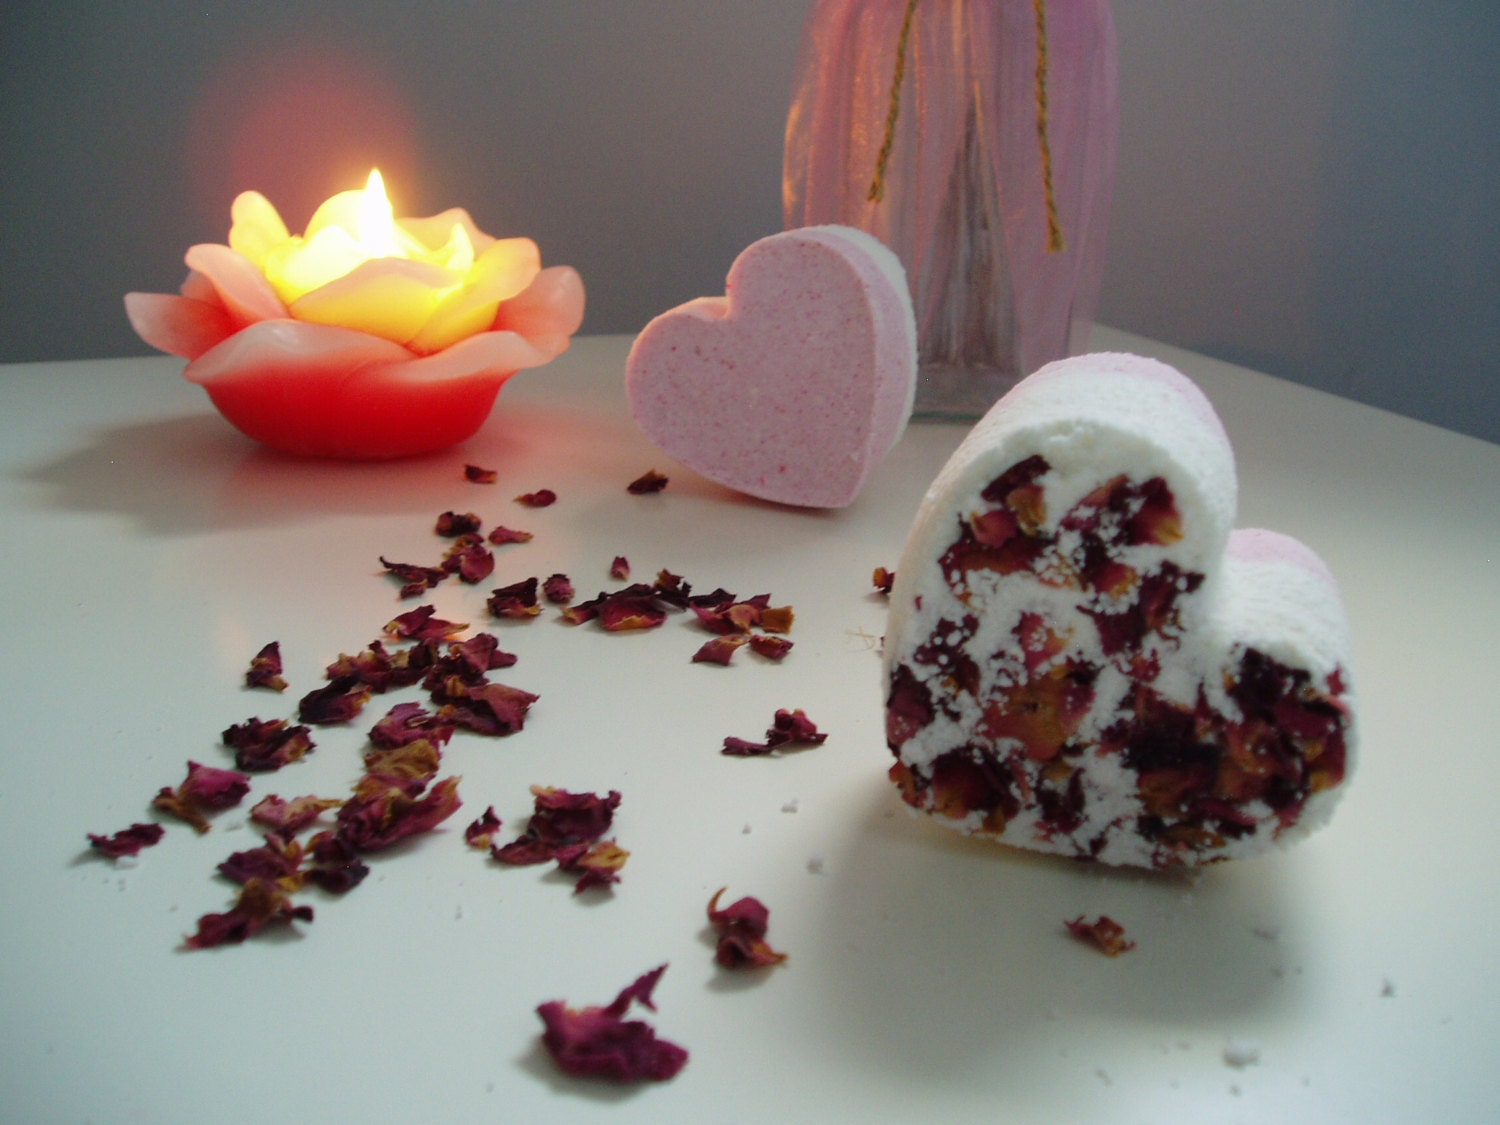 Love is in the air - bath bomb with rose petals & Chanel 5 like scent - Bohemiq